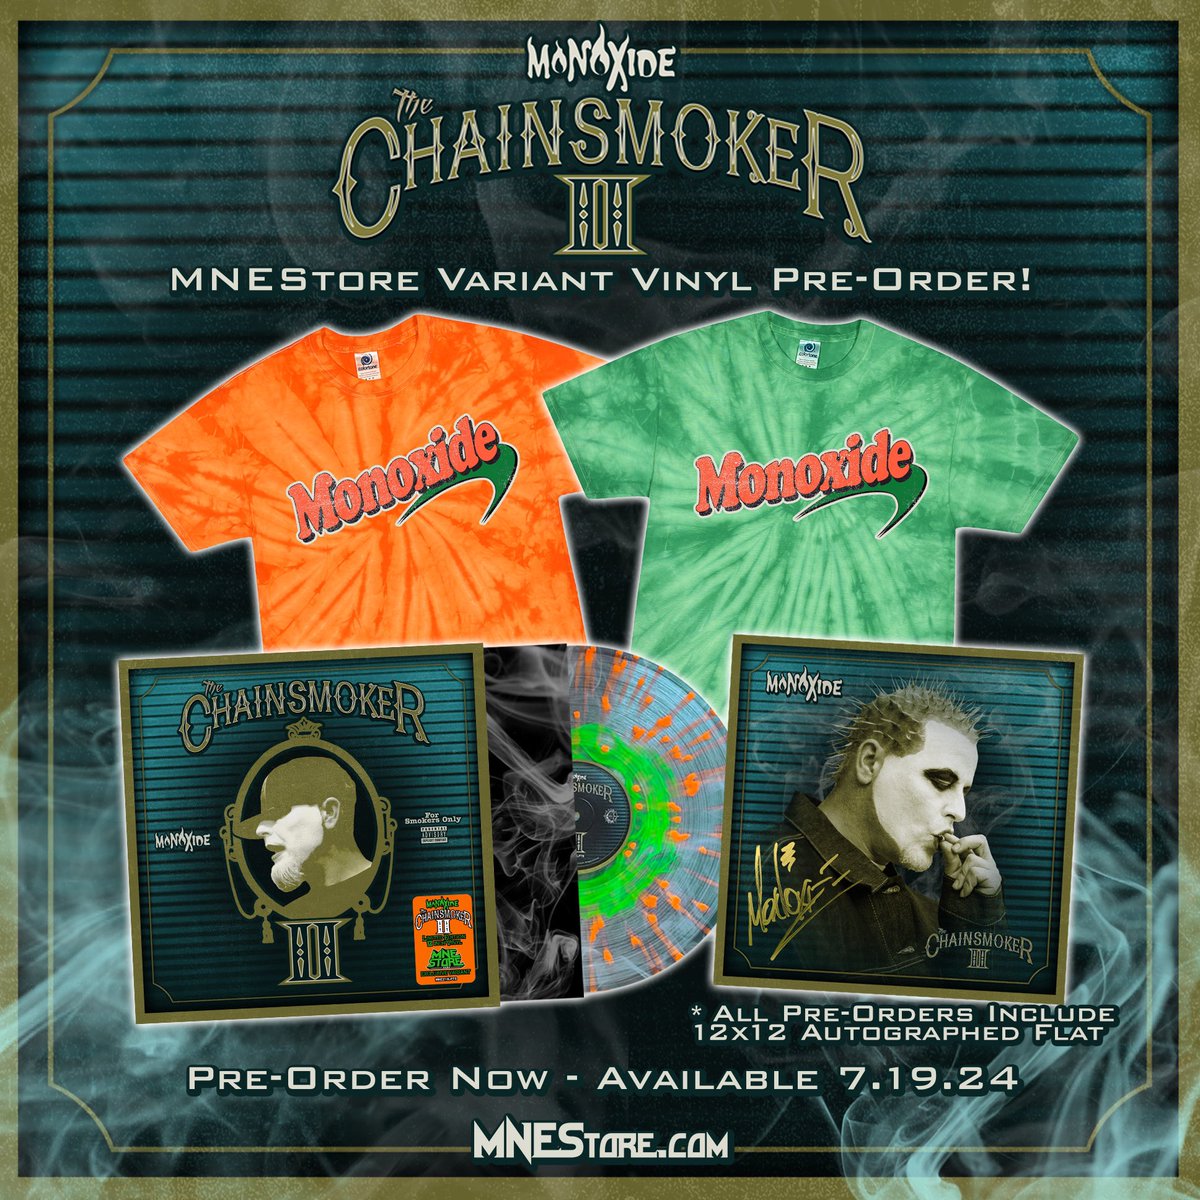 Pre orders are live now for Mono’s “Chainsmoker II” @twiztidshop ➡️ mnestore.com They’re here July 19th 💨